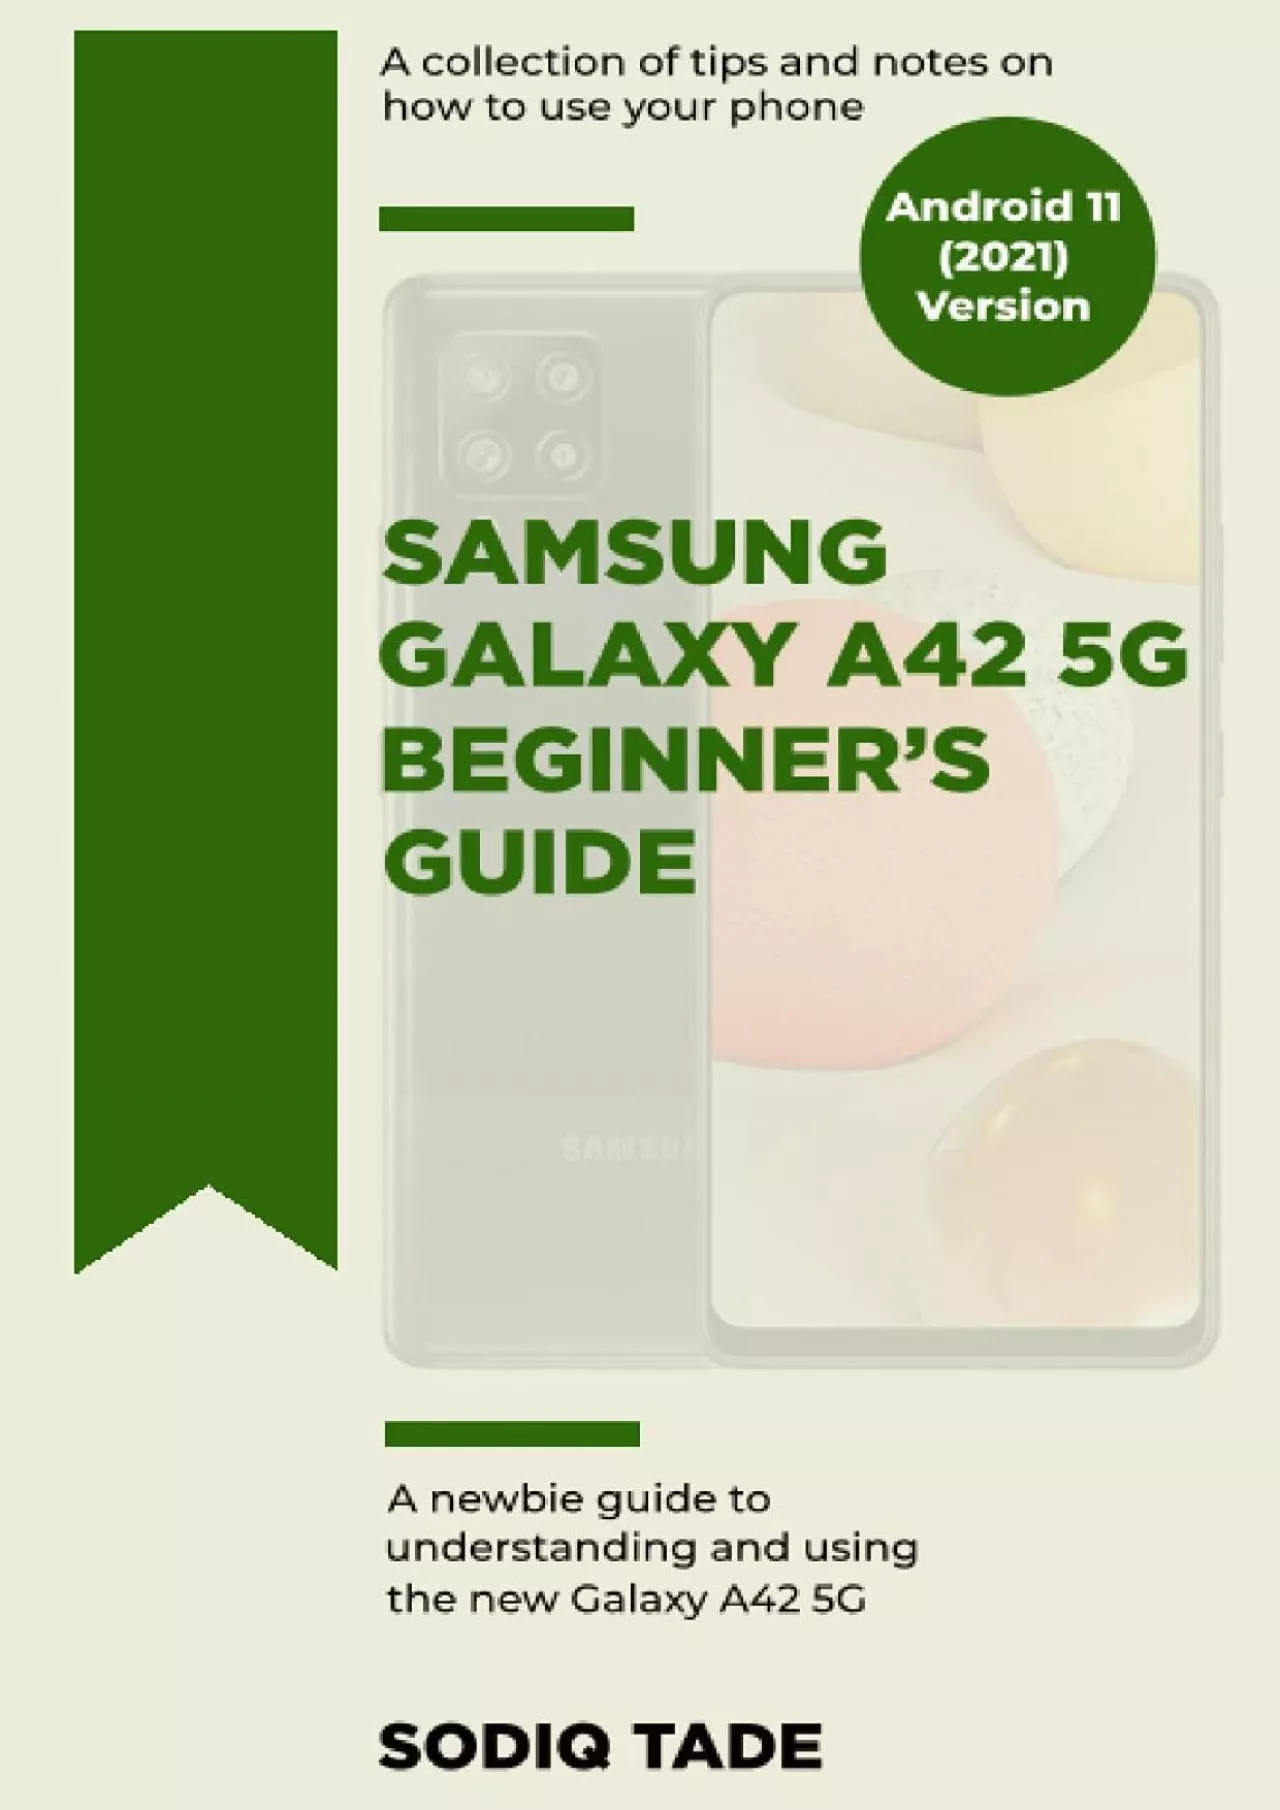 [READ]-SAMSUNG GALAXY A42 5G BEGINNER\'S GUIDE(Android 11, 2021 Version): A newbie guide